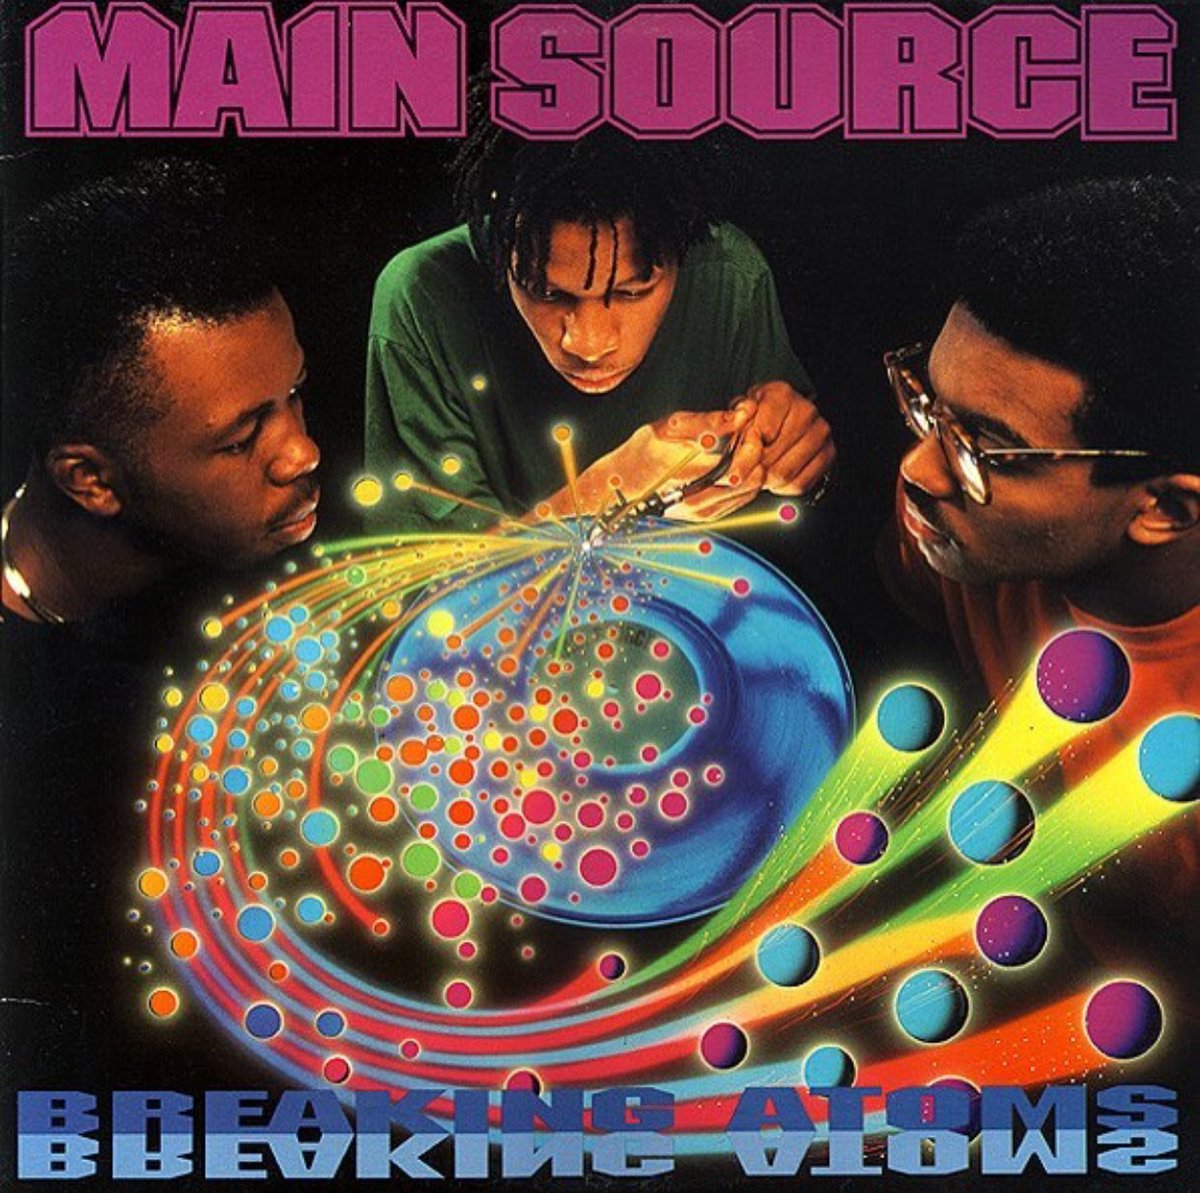 Og Legacy July 23 1991 Main Source Debut With Their Classic Lp Breaking Atoms On Wild Pitch Records Oglegacy Hiphop Goldenagehiphop Goldenerahiphop Boombap 90shiphop Mainsource Largeprofessor Kcut Sirscratch